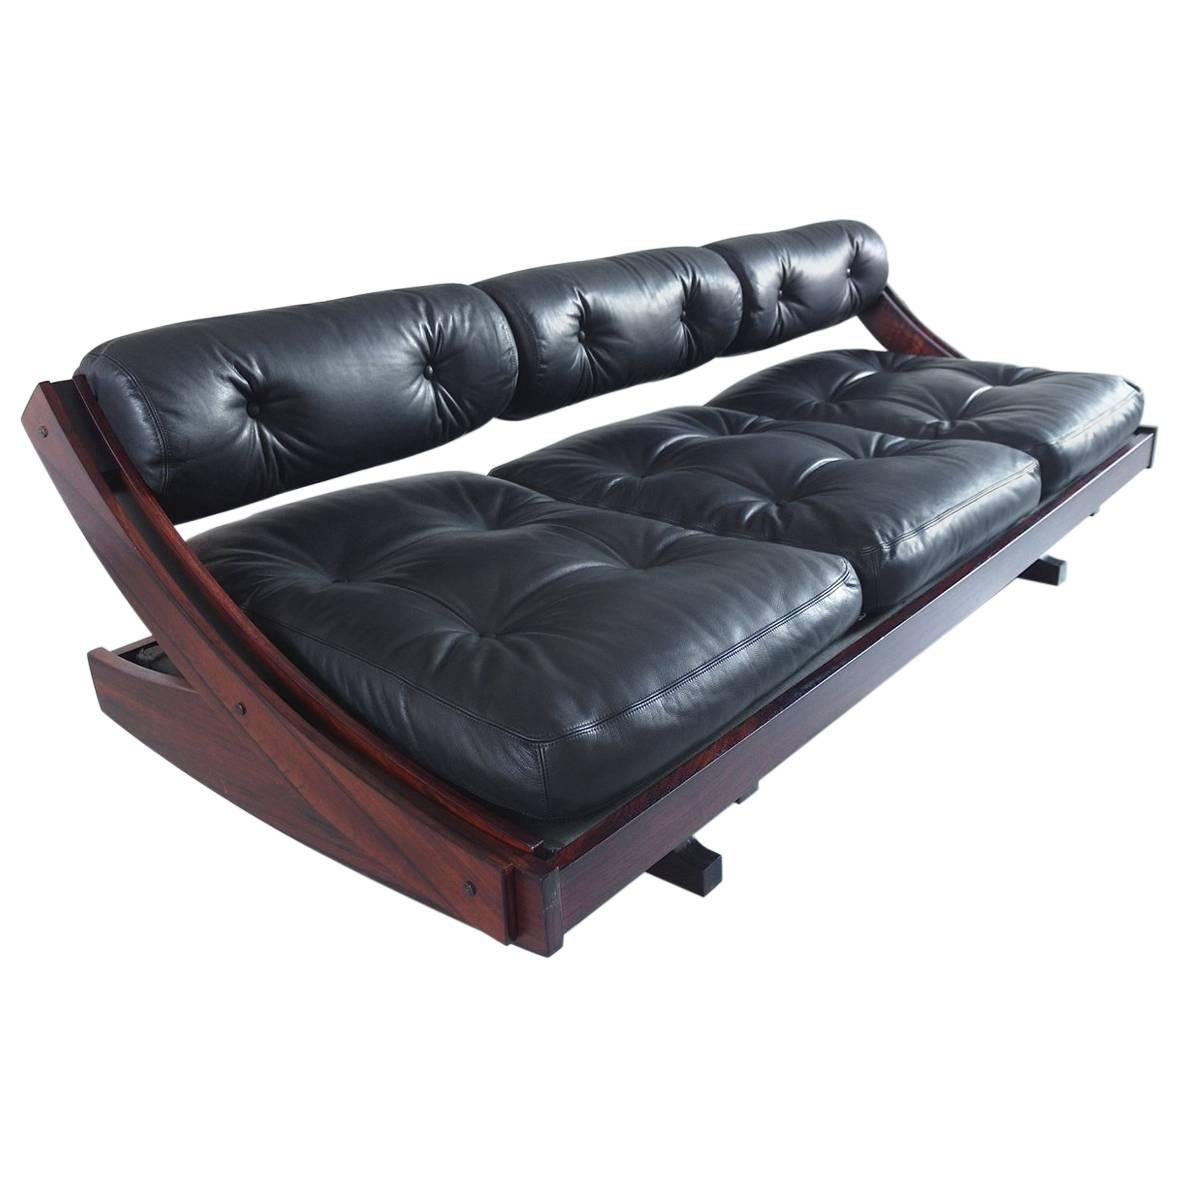 Gianni Songia Black Leather Daybed Sofa Model GS-195 for Sormani, Italy, 1963